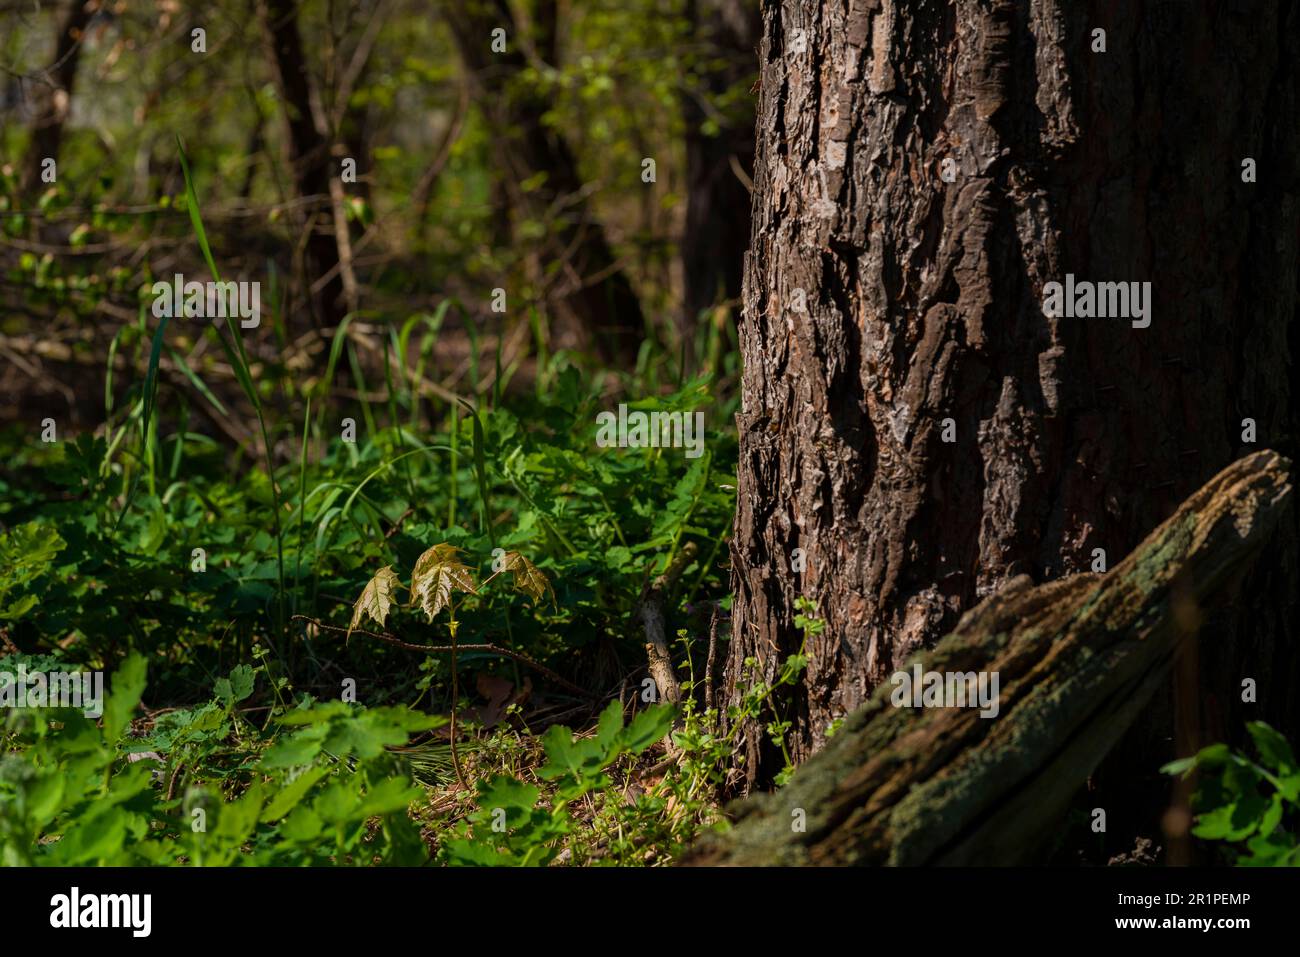 Small young maple tree in spring in the woods next to a large old pine tree Stock Photo